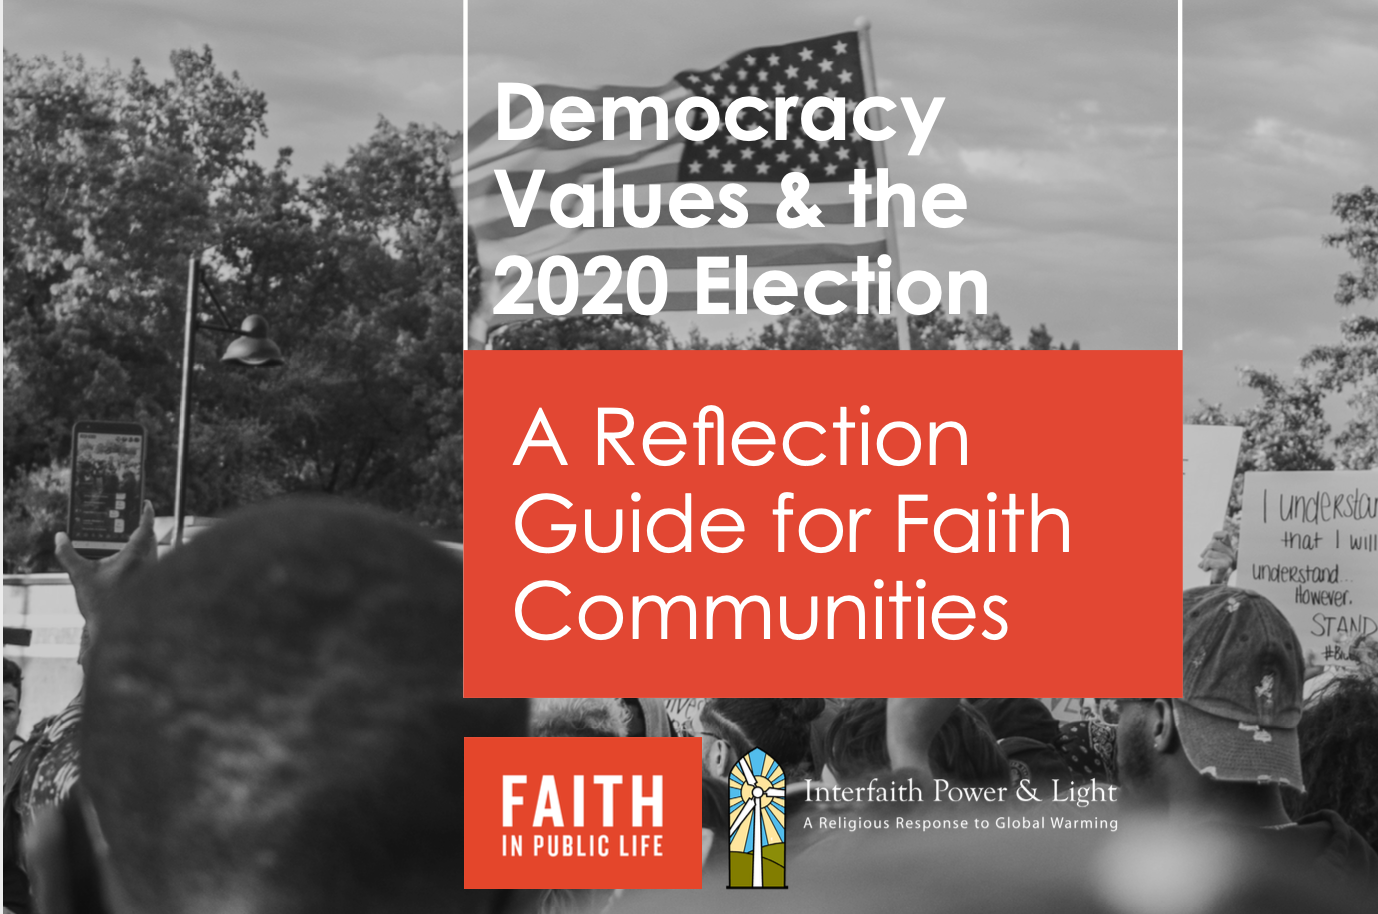 Democracy, Values & the 2020 Election: A Reflection Guide for Faith Communities